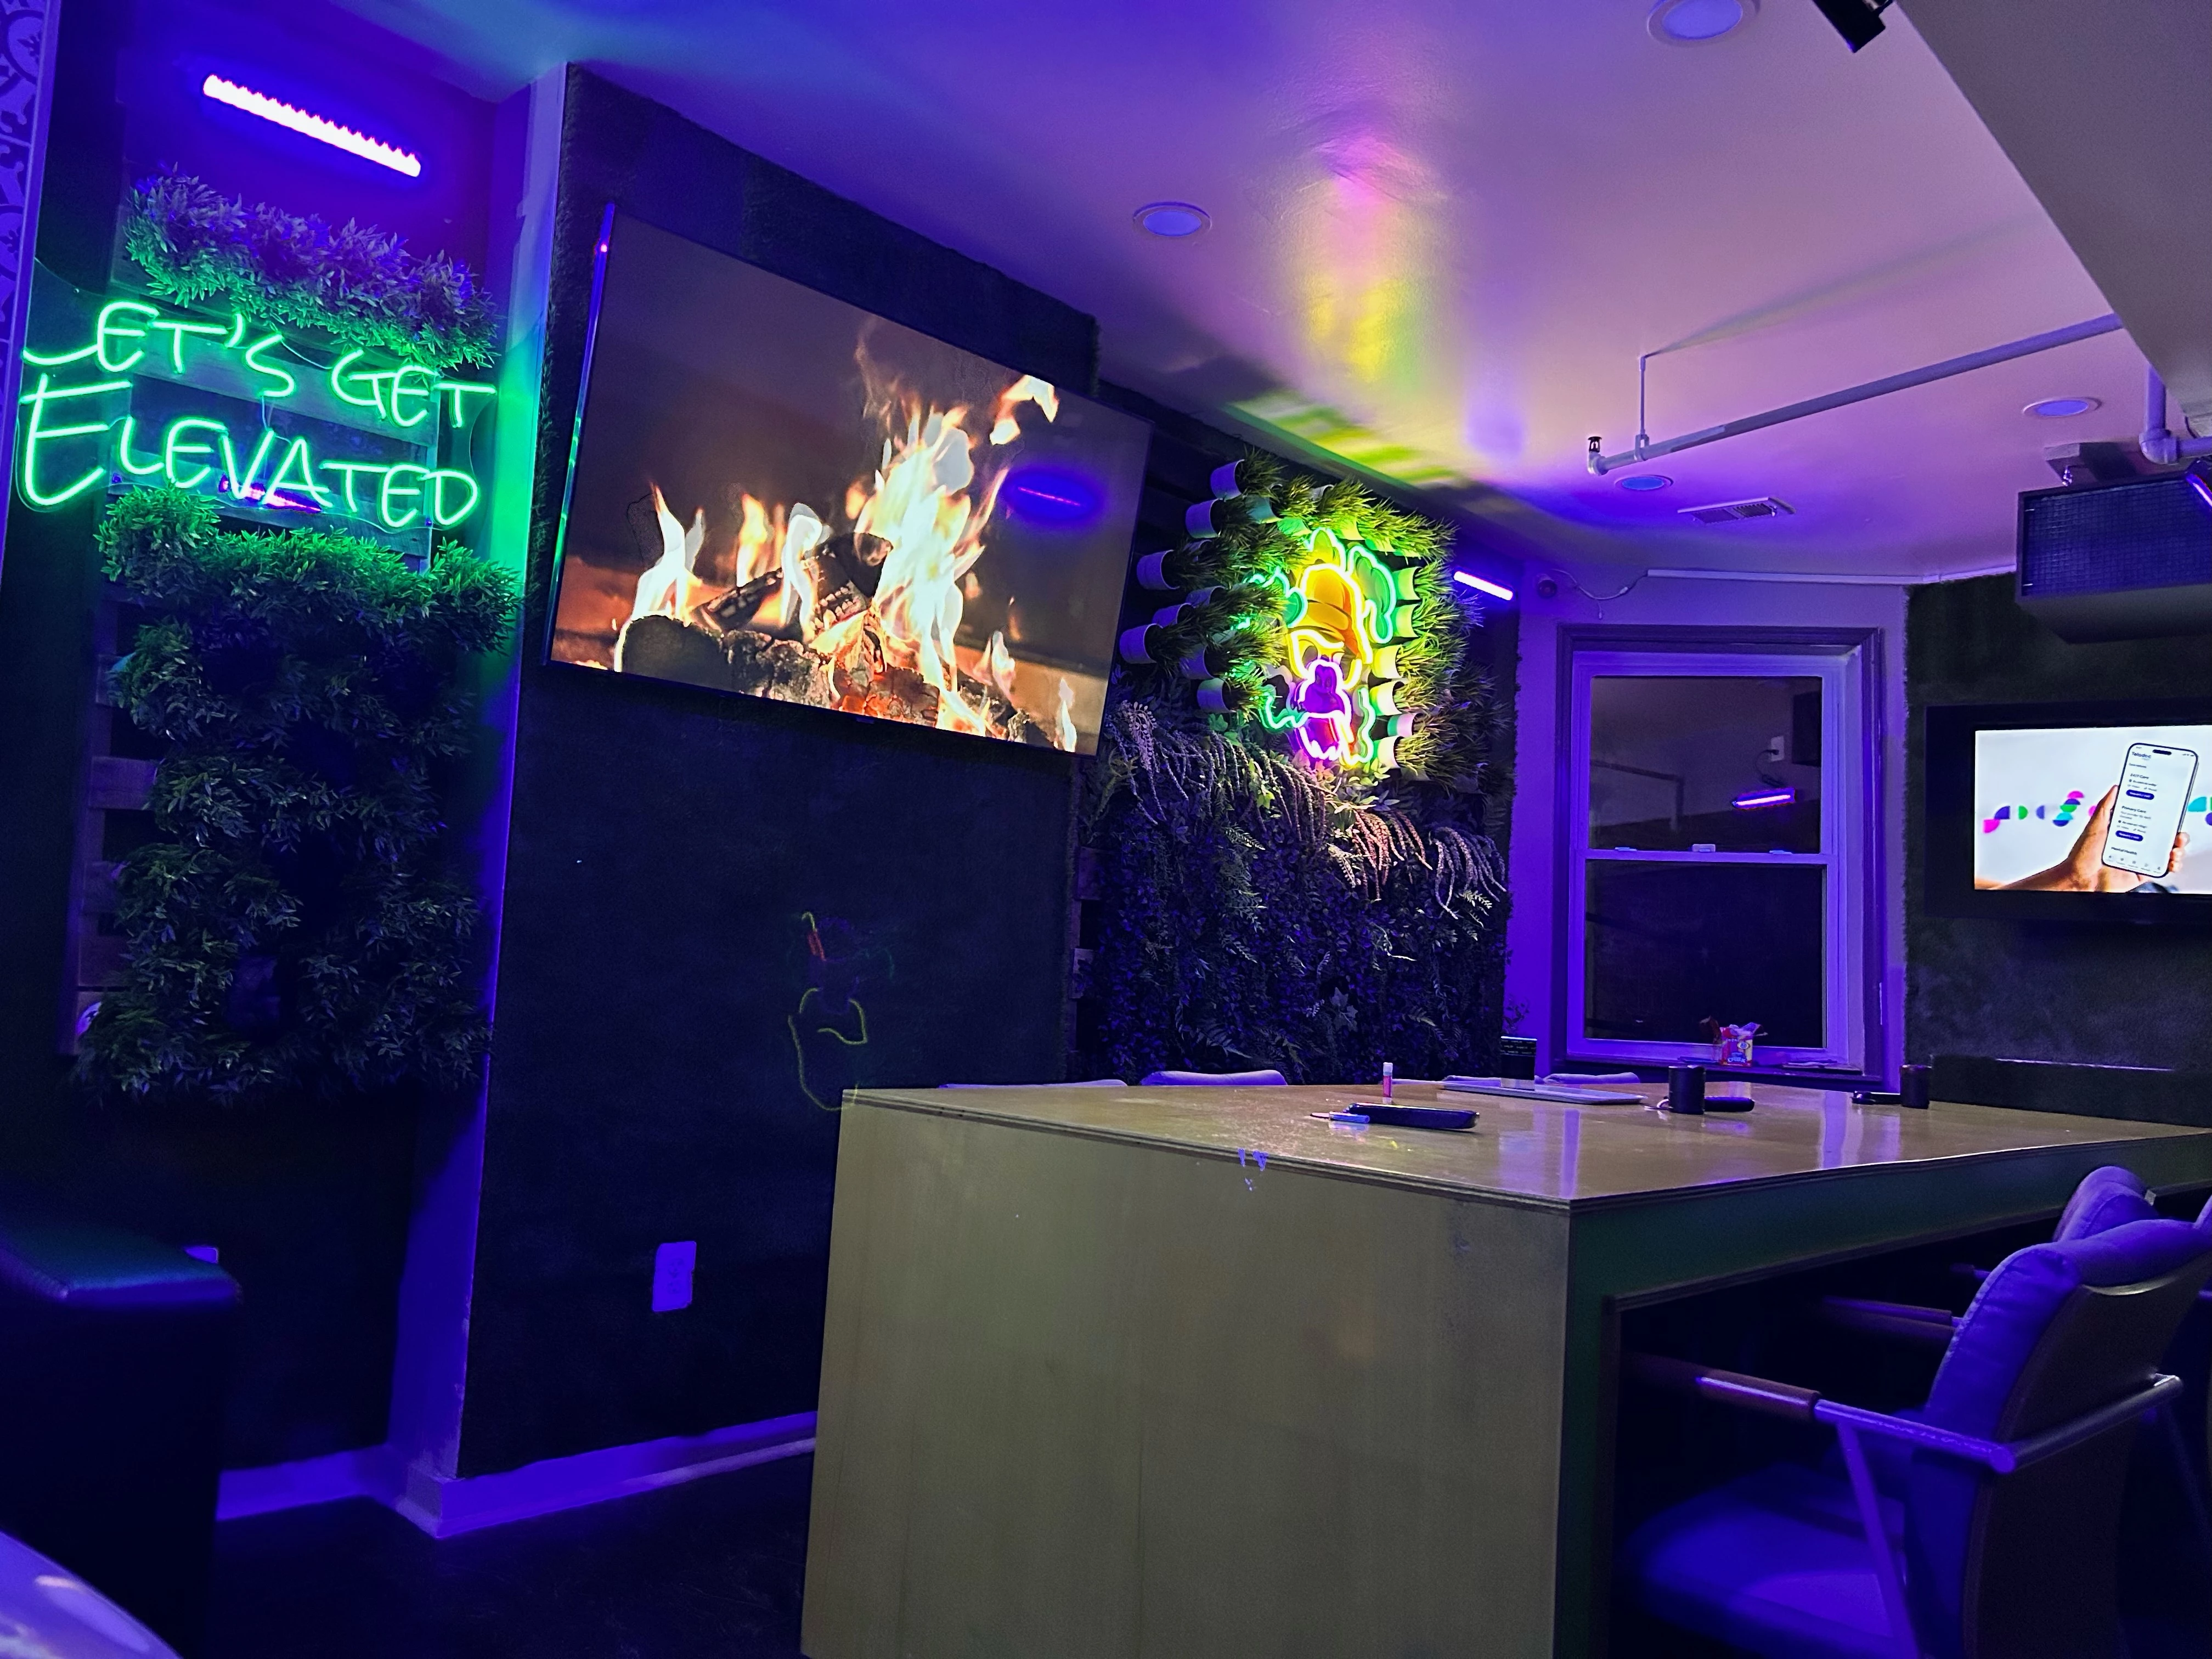 The Weed Lounge at Elevated